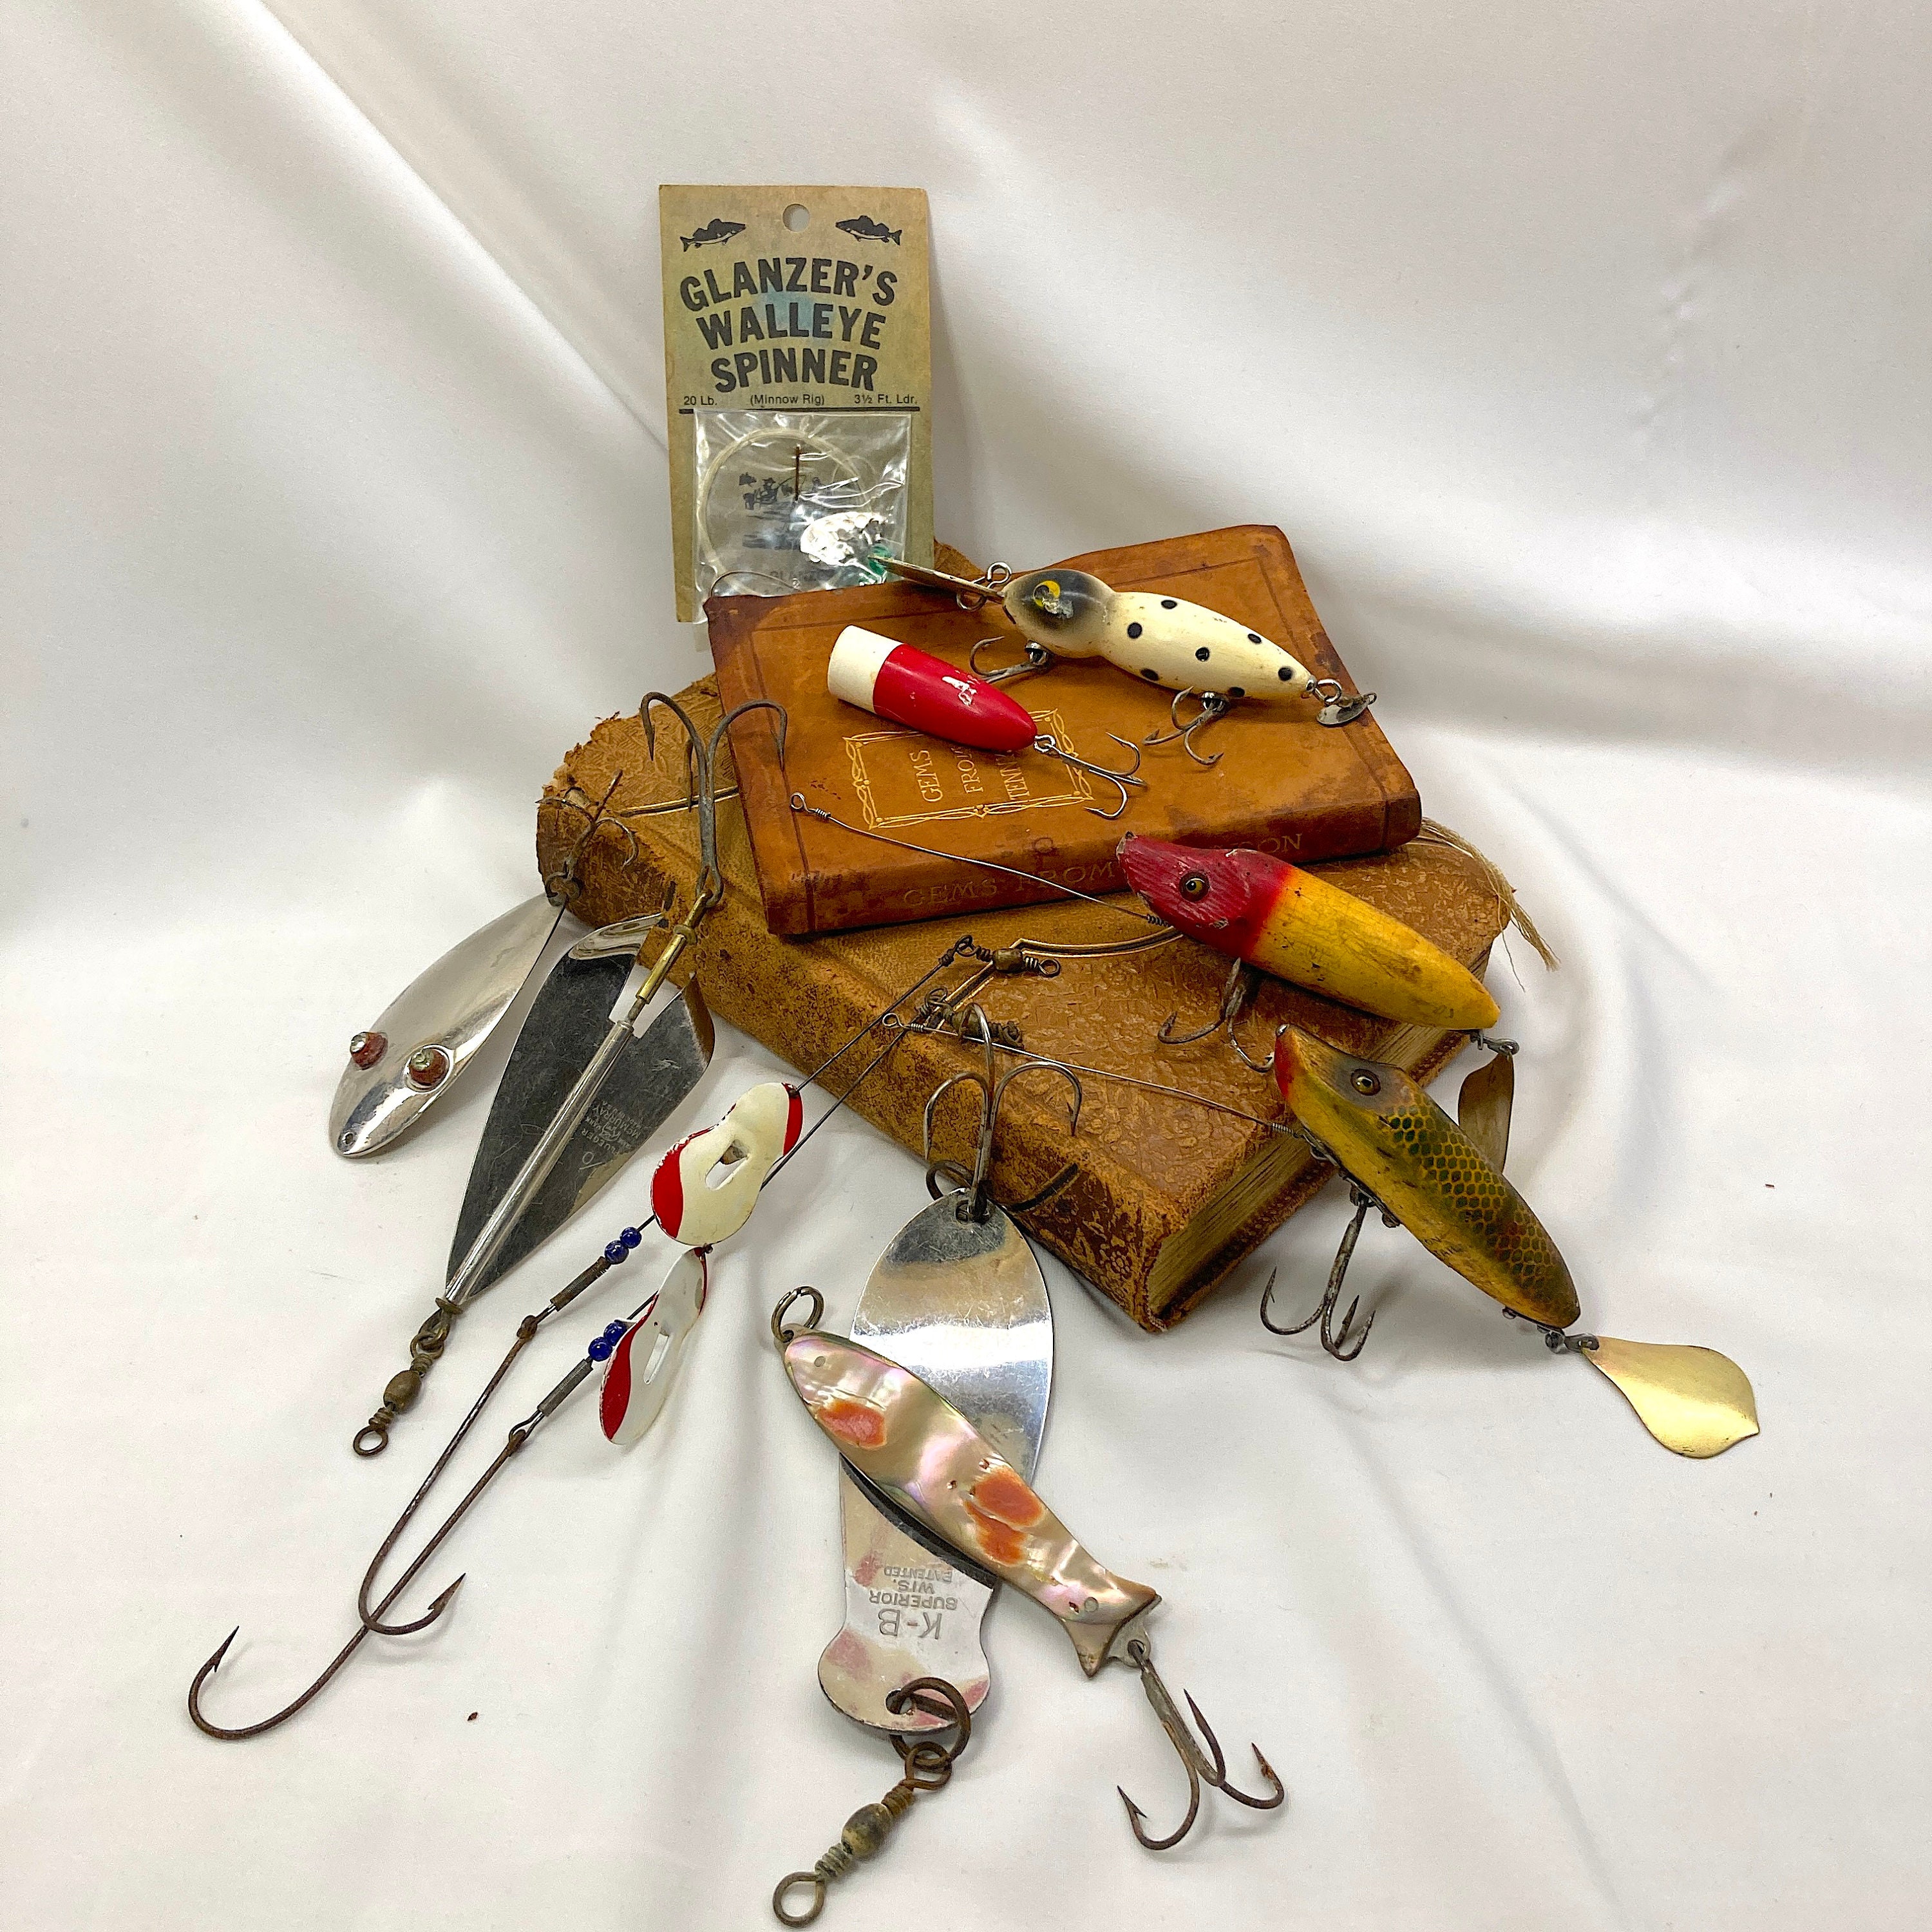 Scheels Outfitters Inline Spinners  Lure making, Old fishing lures,  Spinners